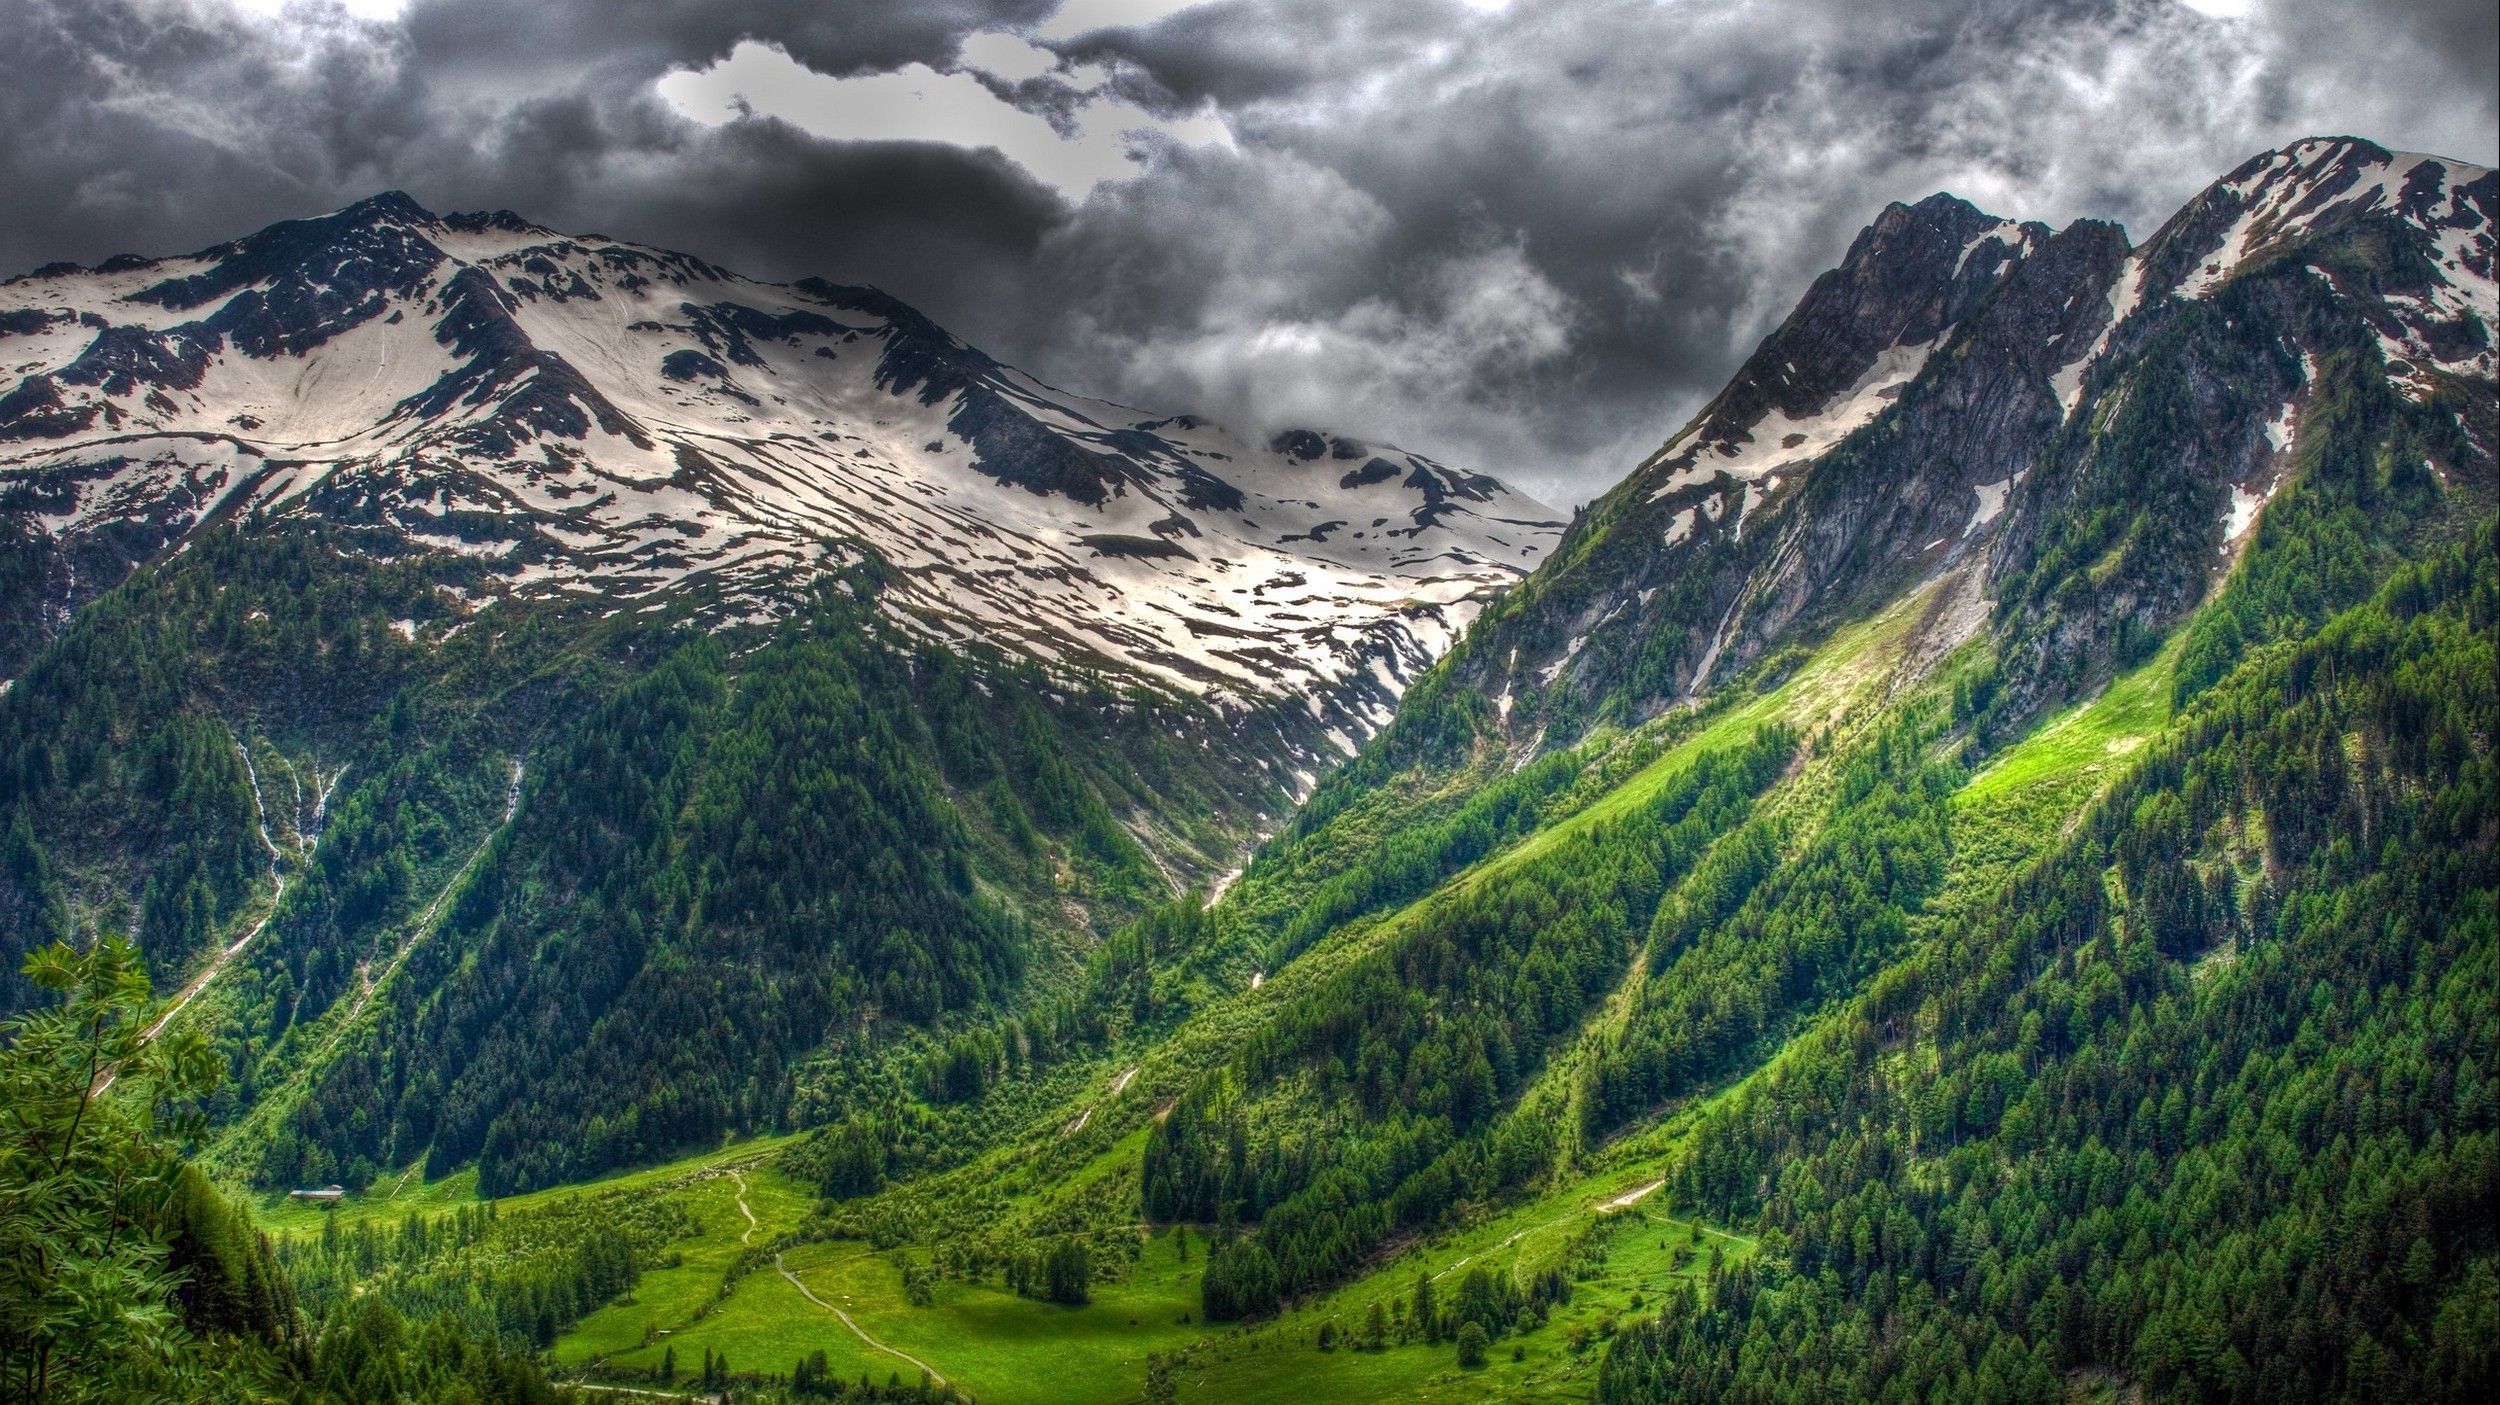 Wallpaper, 2500x1405 px, clouds, forest, green, landscape, nature, snowy peak, spring, Swiss Alps 2500x1405